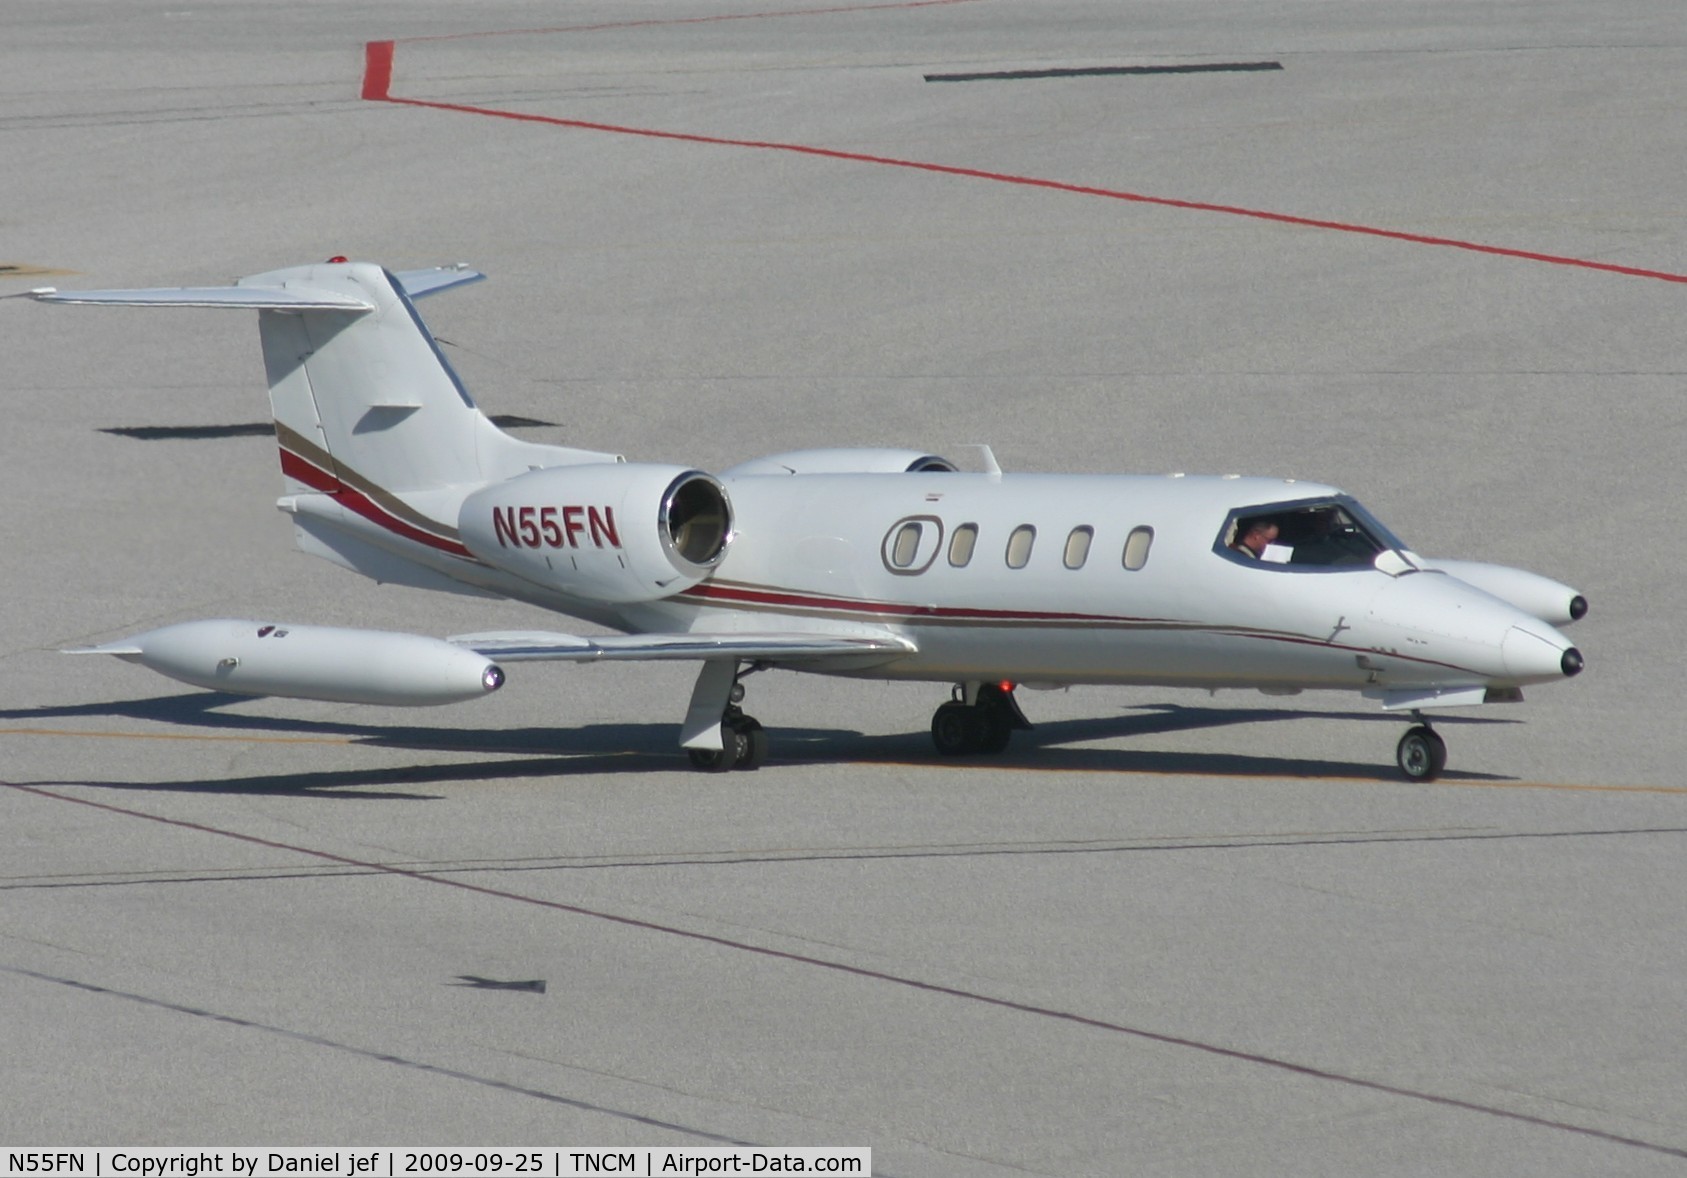 N55FN, 1978 Gates Learjet 35A C/N 202, Back tracking to A and will hold short. they are on a mercy flight out of Tncm